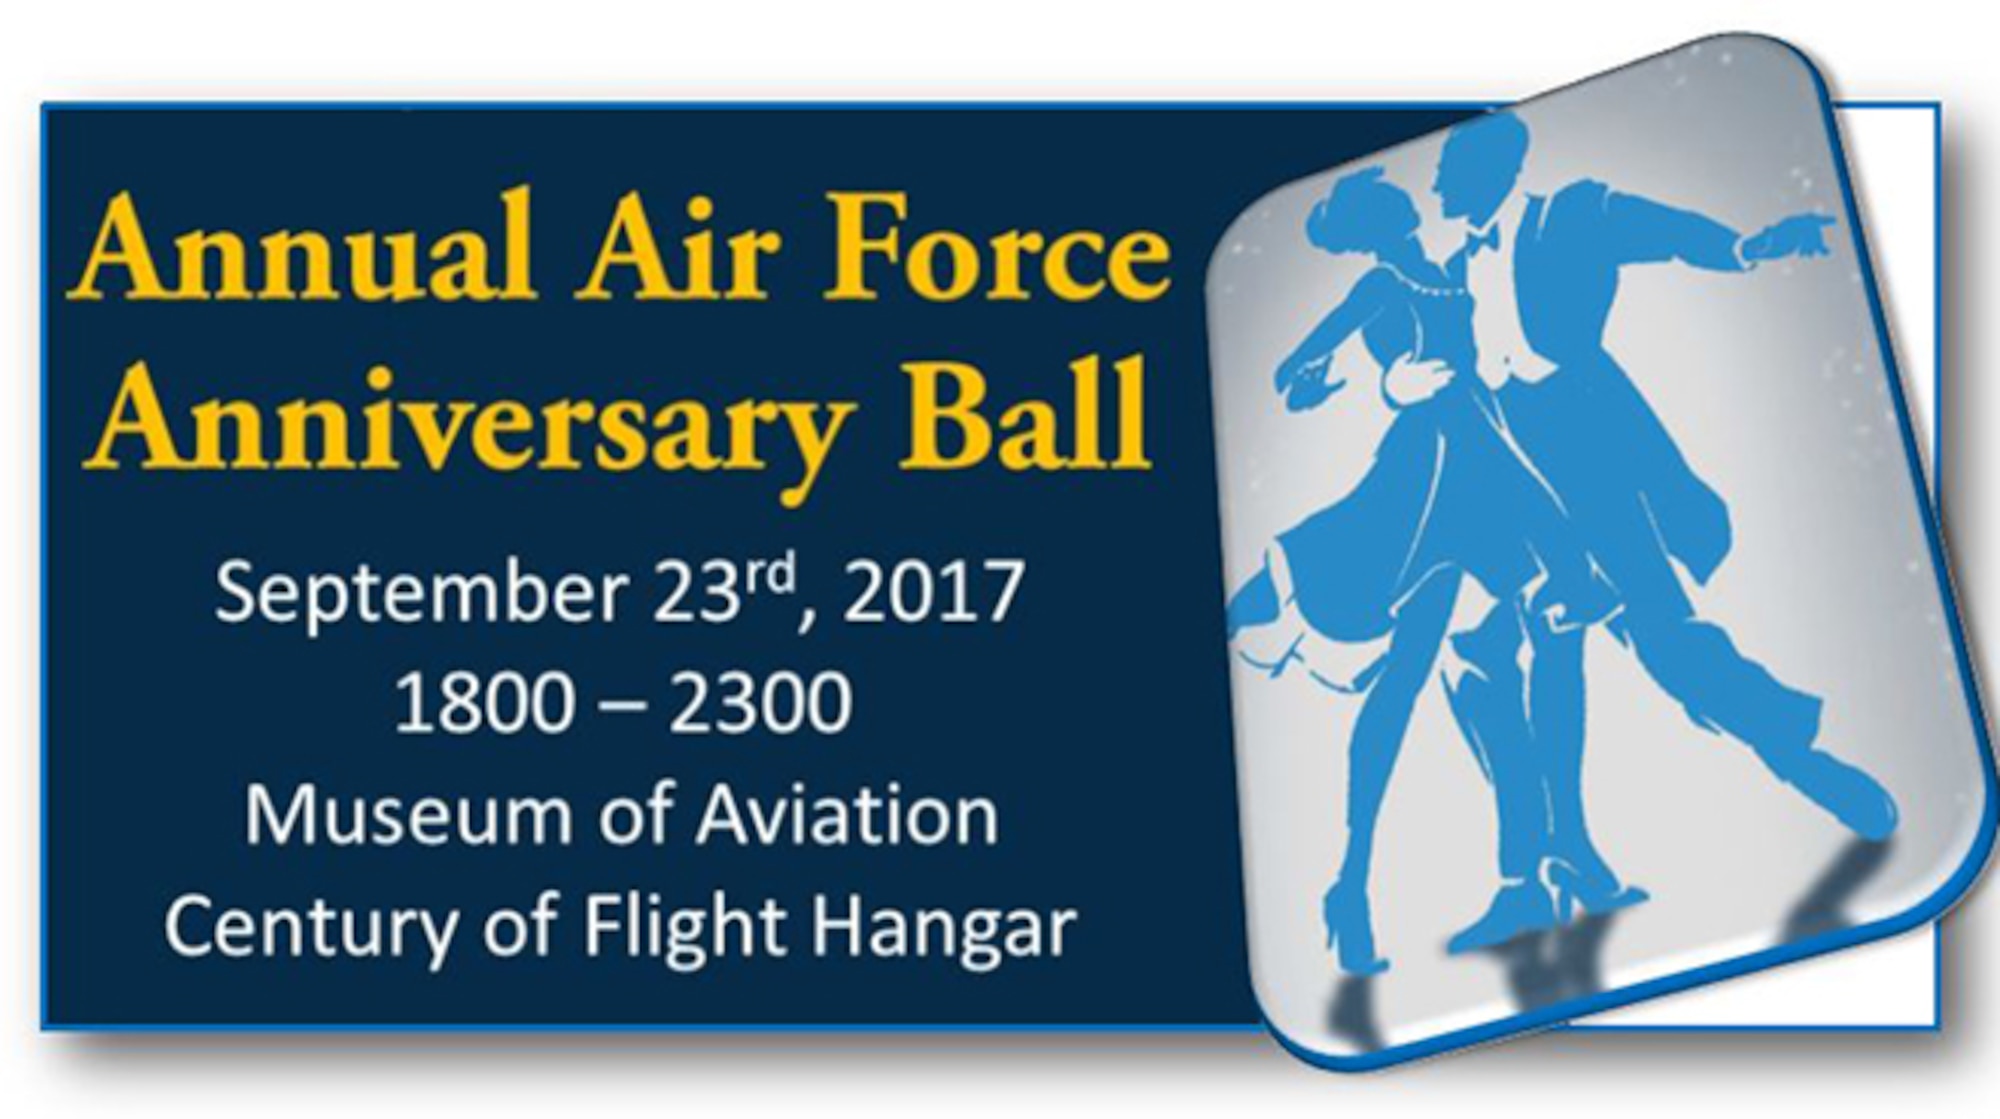 Air Force Ball tickets available